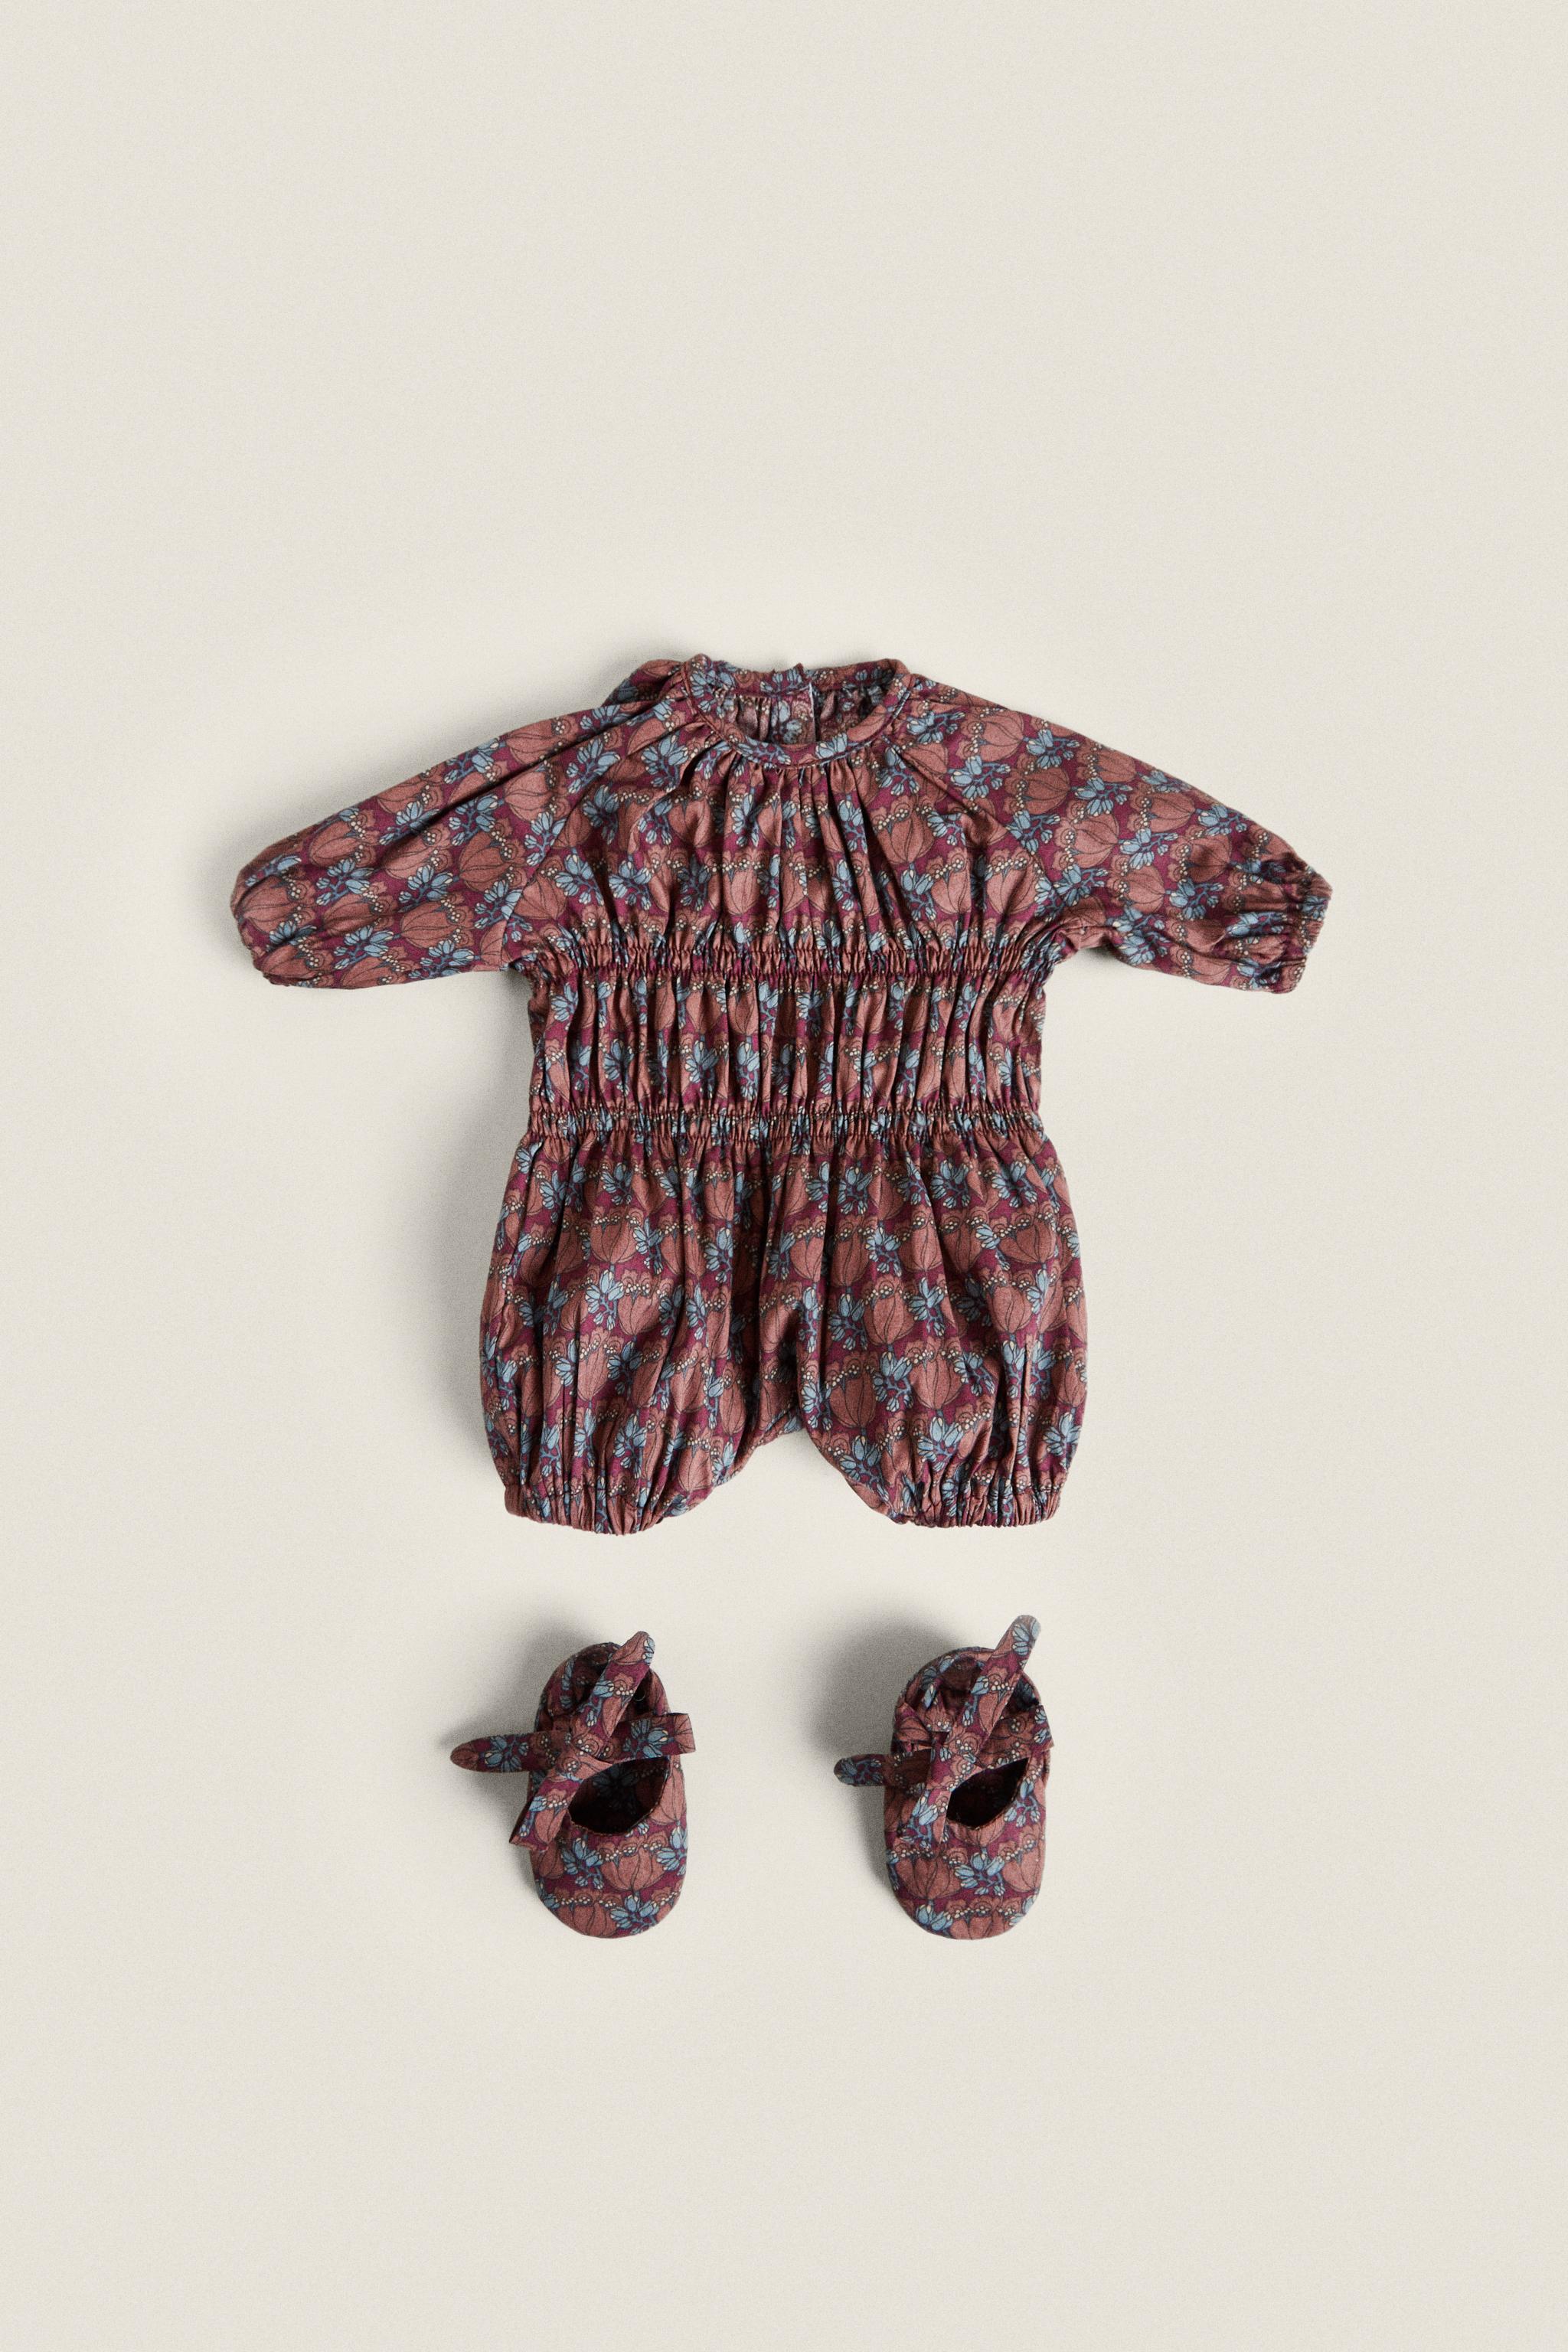 MADE WITH LIBERTY FABRIC. FLORAL PRINT FABRIC CHILDREN'S BODYSUIT -  Burgundy